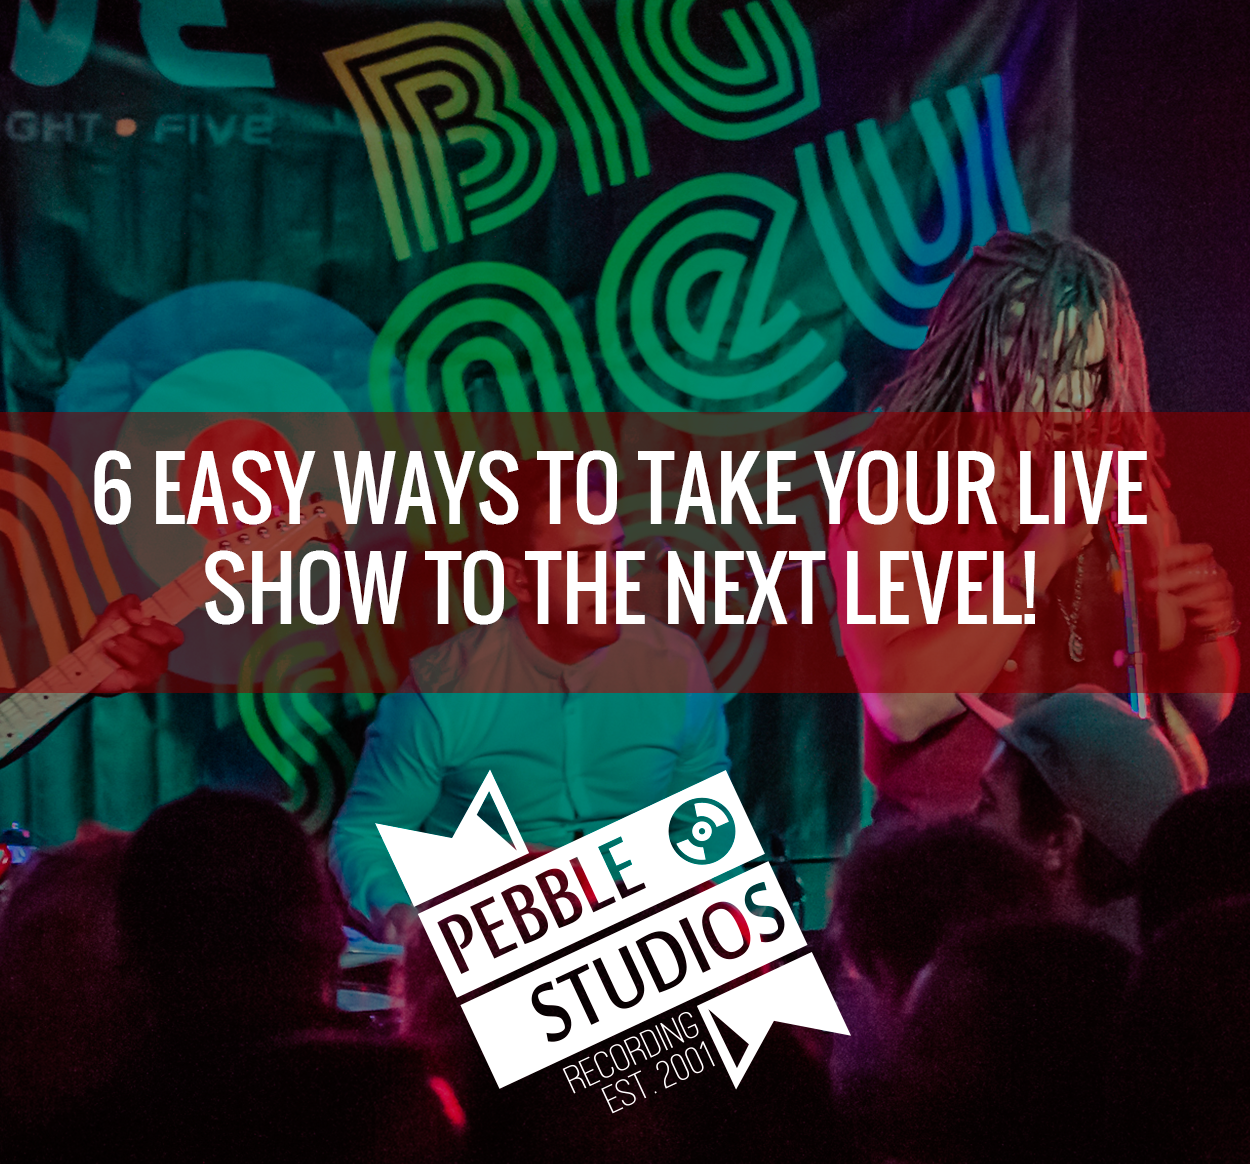 6 Easy Ways to Take Your Live Show to The Next Level